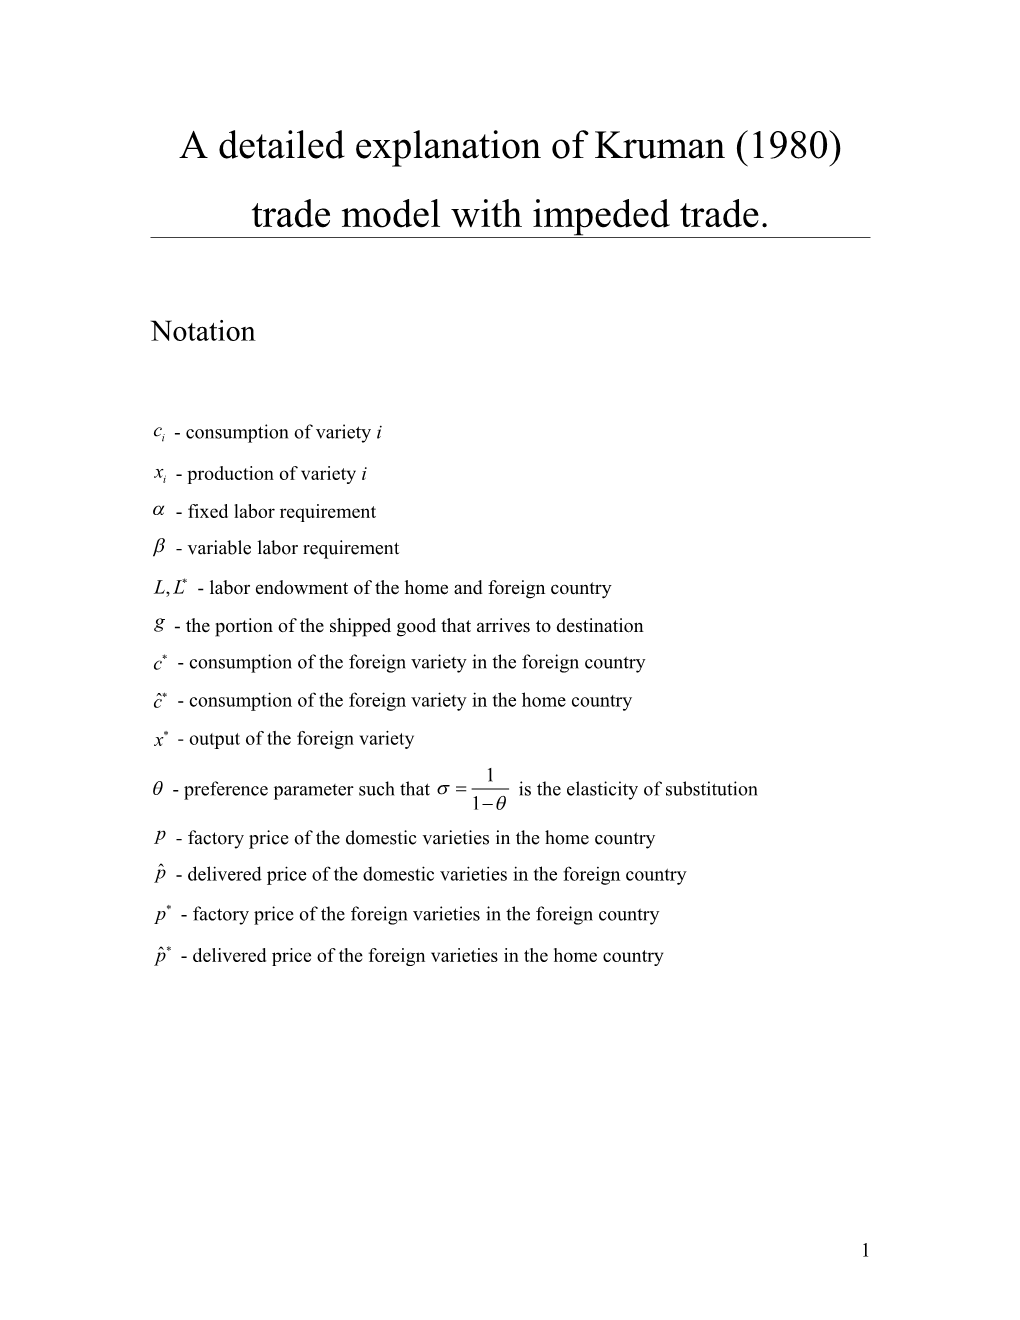 ORMAT a Detailed Explanation of Kruman (1980) Trade Model with Impeded Trade